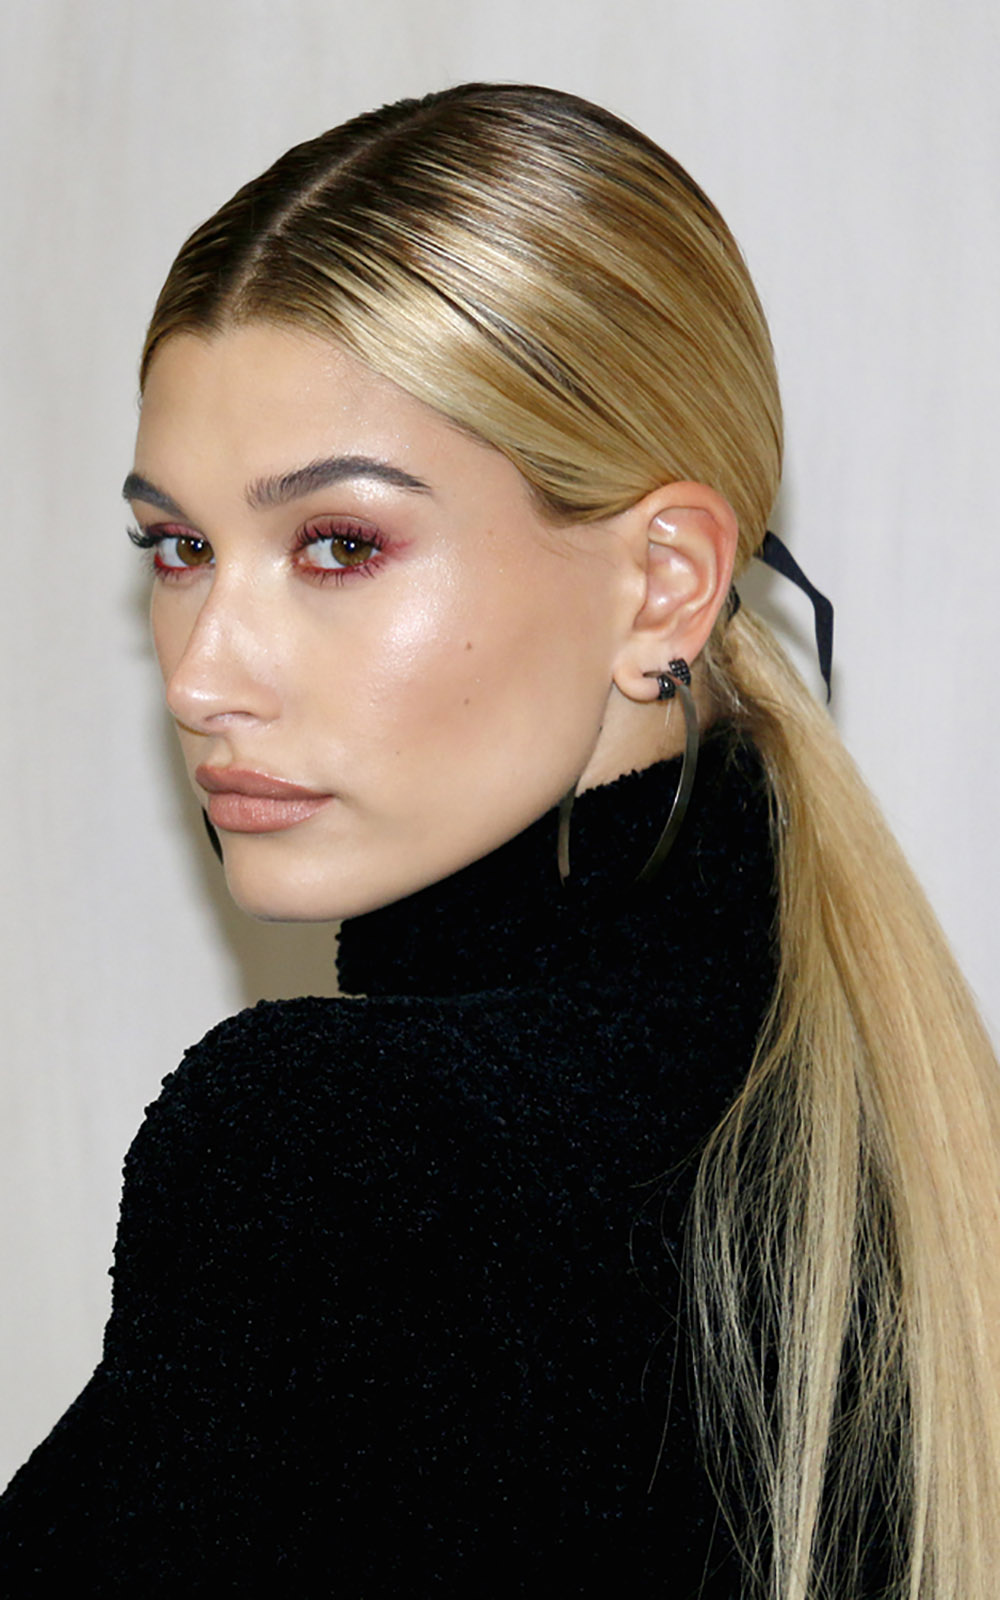 Hailey Baldwin at the Hammer Museum Gala In The Garden held at the Hammer Museum in Westwood, USA on October 14, 2017.; Shutterstock ID 734561584; Purchase Order: Fashion Quarterly